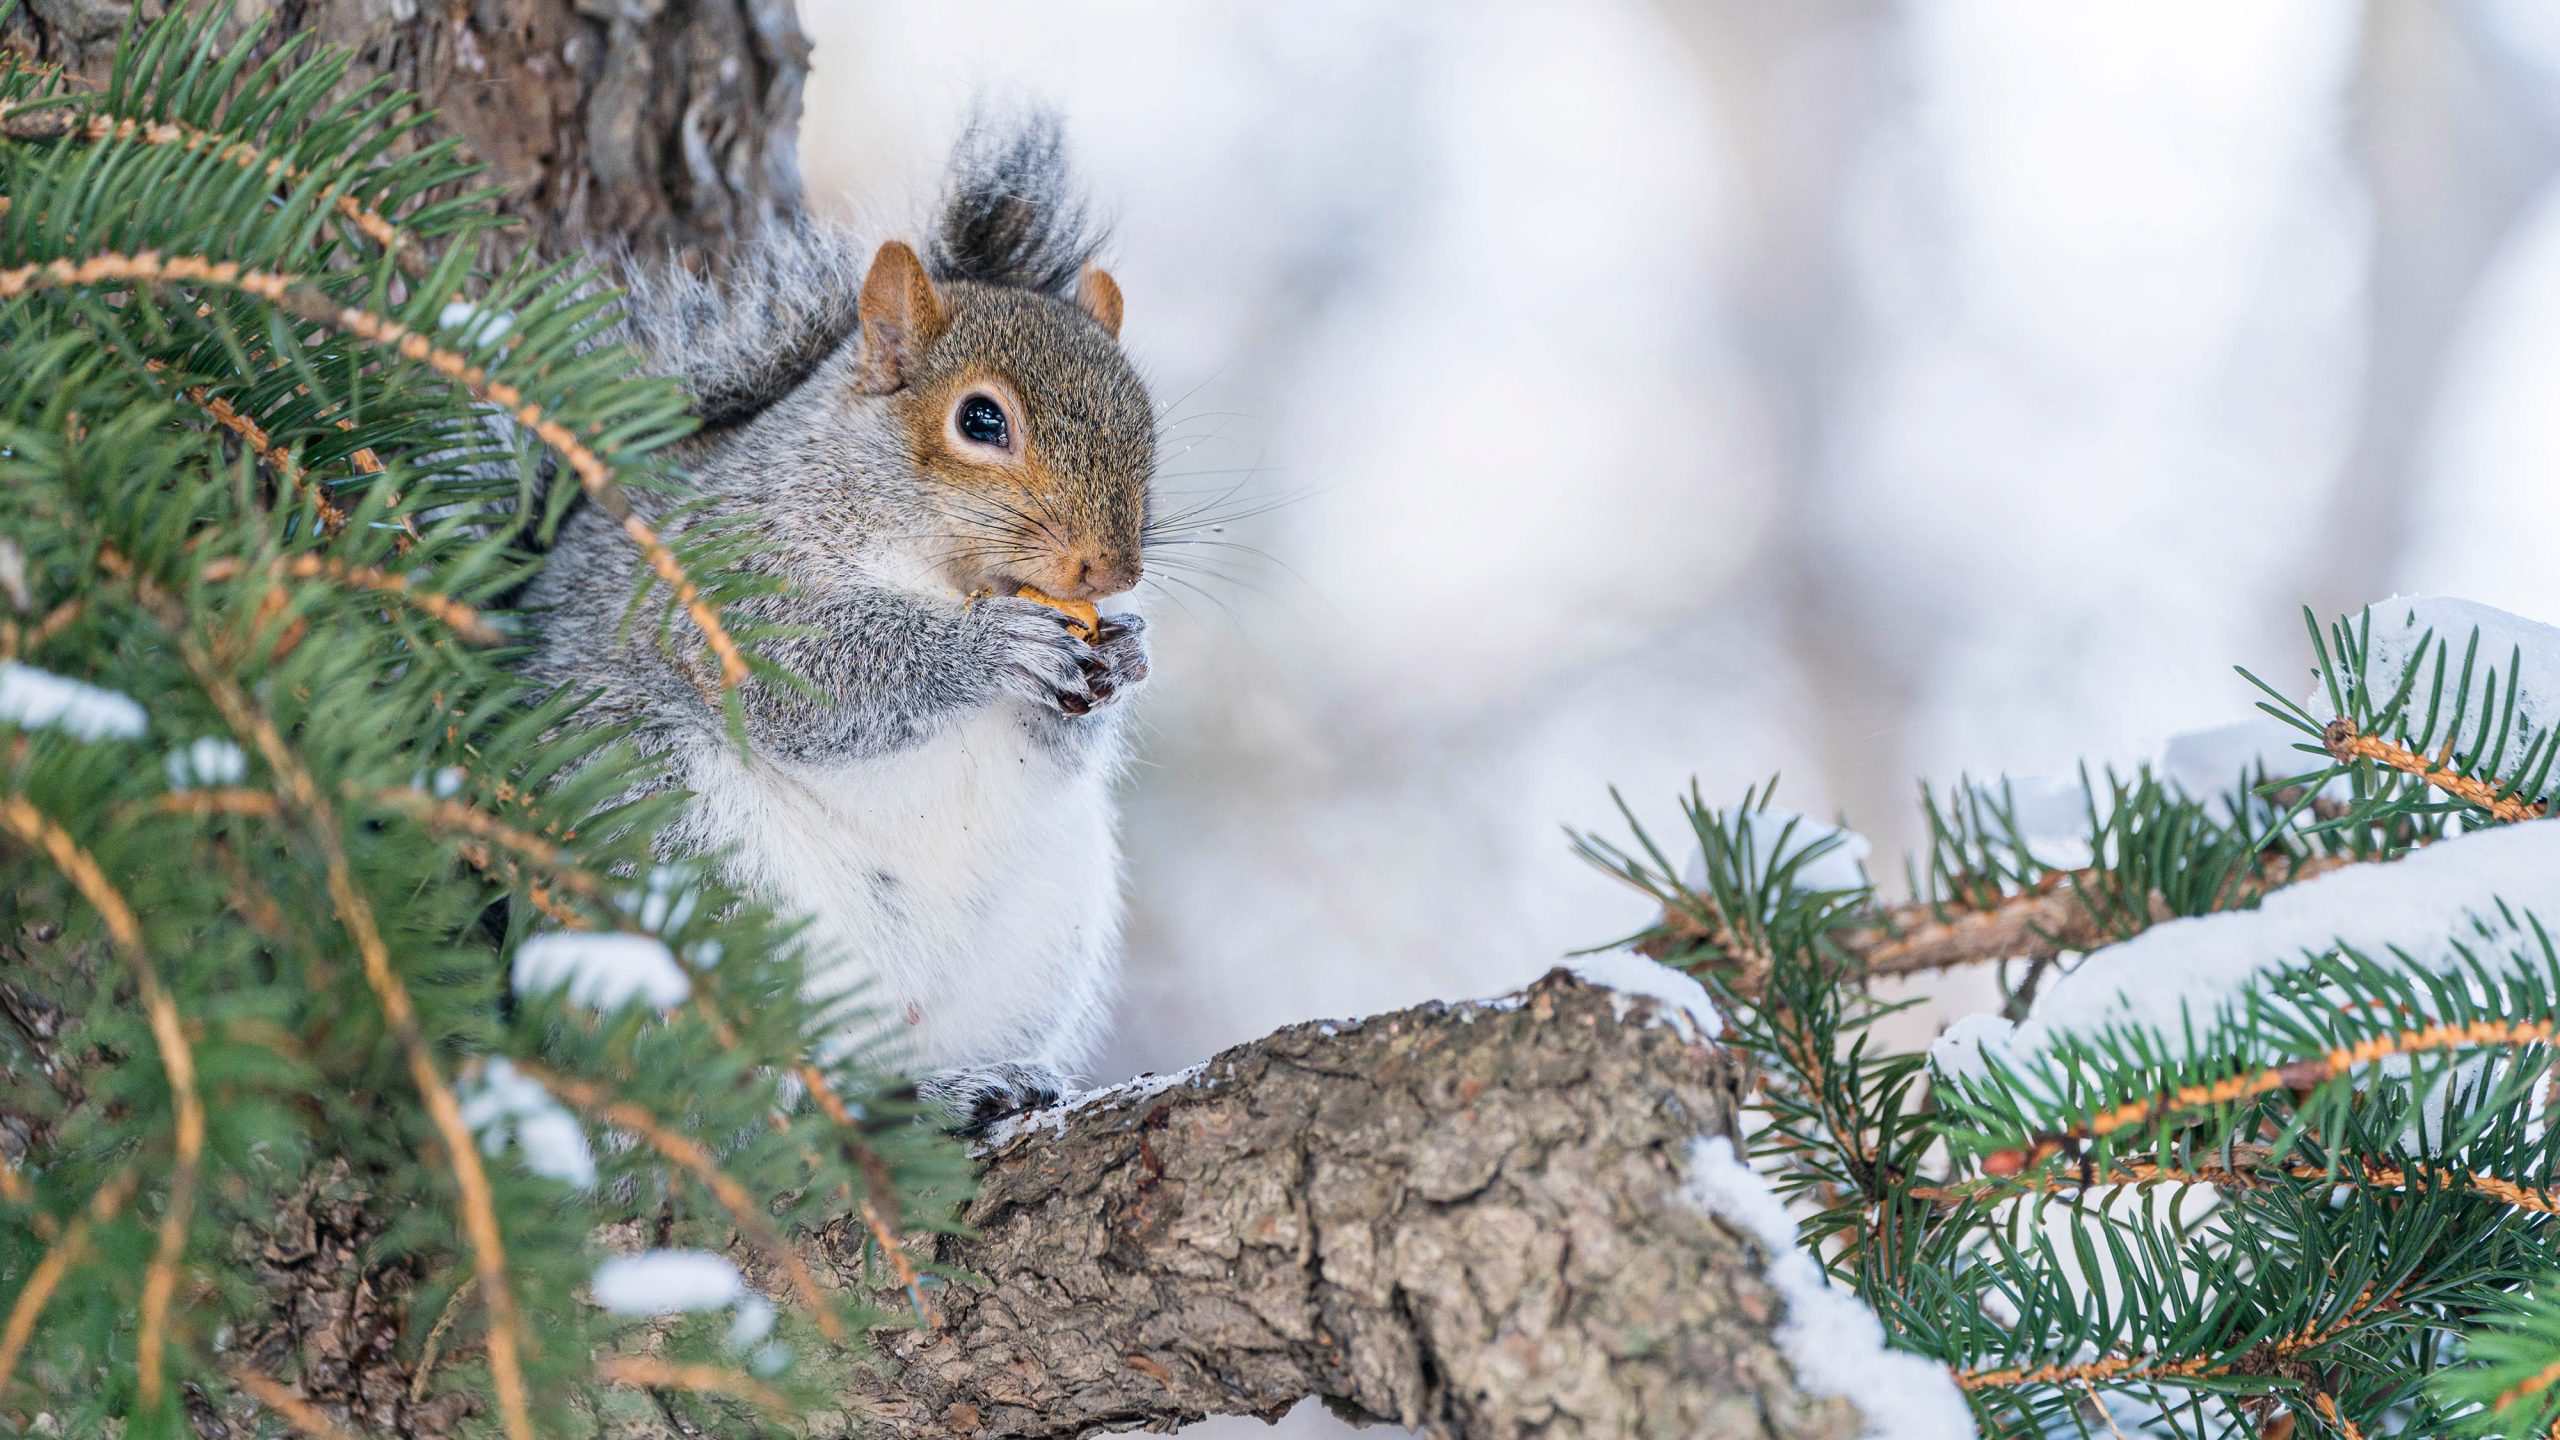 A squirrel eats a nut in a conifer among snow